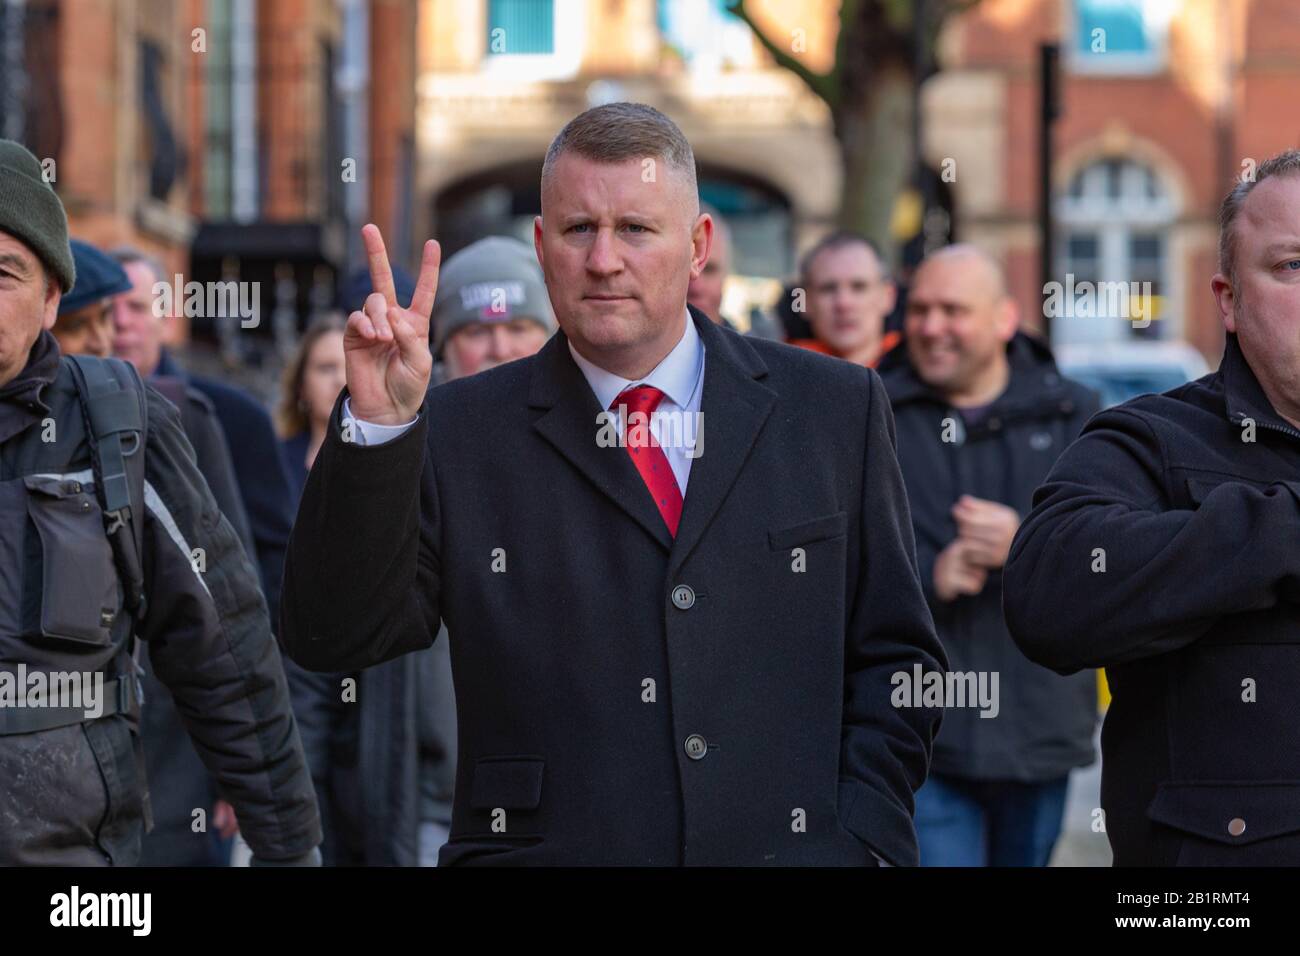 London, UK. 27th Feb, 2020. Paul Golding, Britain First leader, meets with his supporters at Marleybone Station  before making the short walk to Westminster Magistrates Court where he charged with refusing to comply with a duty under Schedule 7 of the Terrorism Act. He is alleged to have refused to give pin codes for electronic devices when he was stopped at Heathrow airport, returning from a trip to the Russian Parliament in Moscow. Penelope Barritt/Alamy Live News Stock Photo